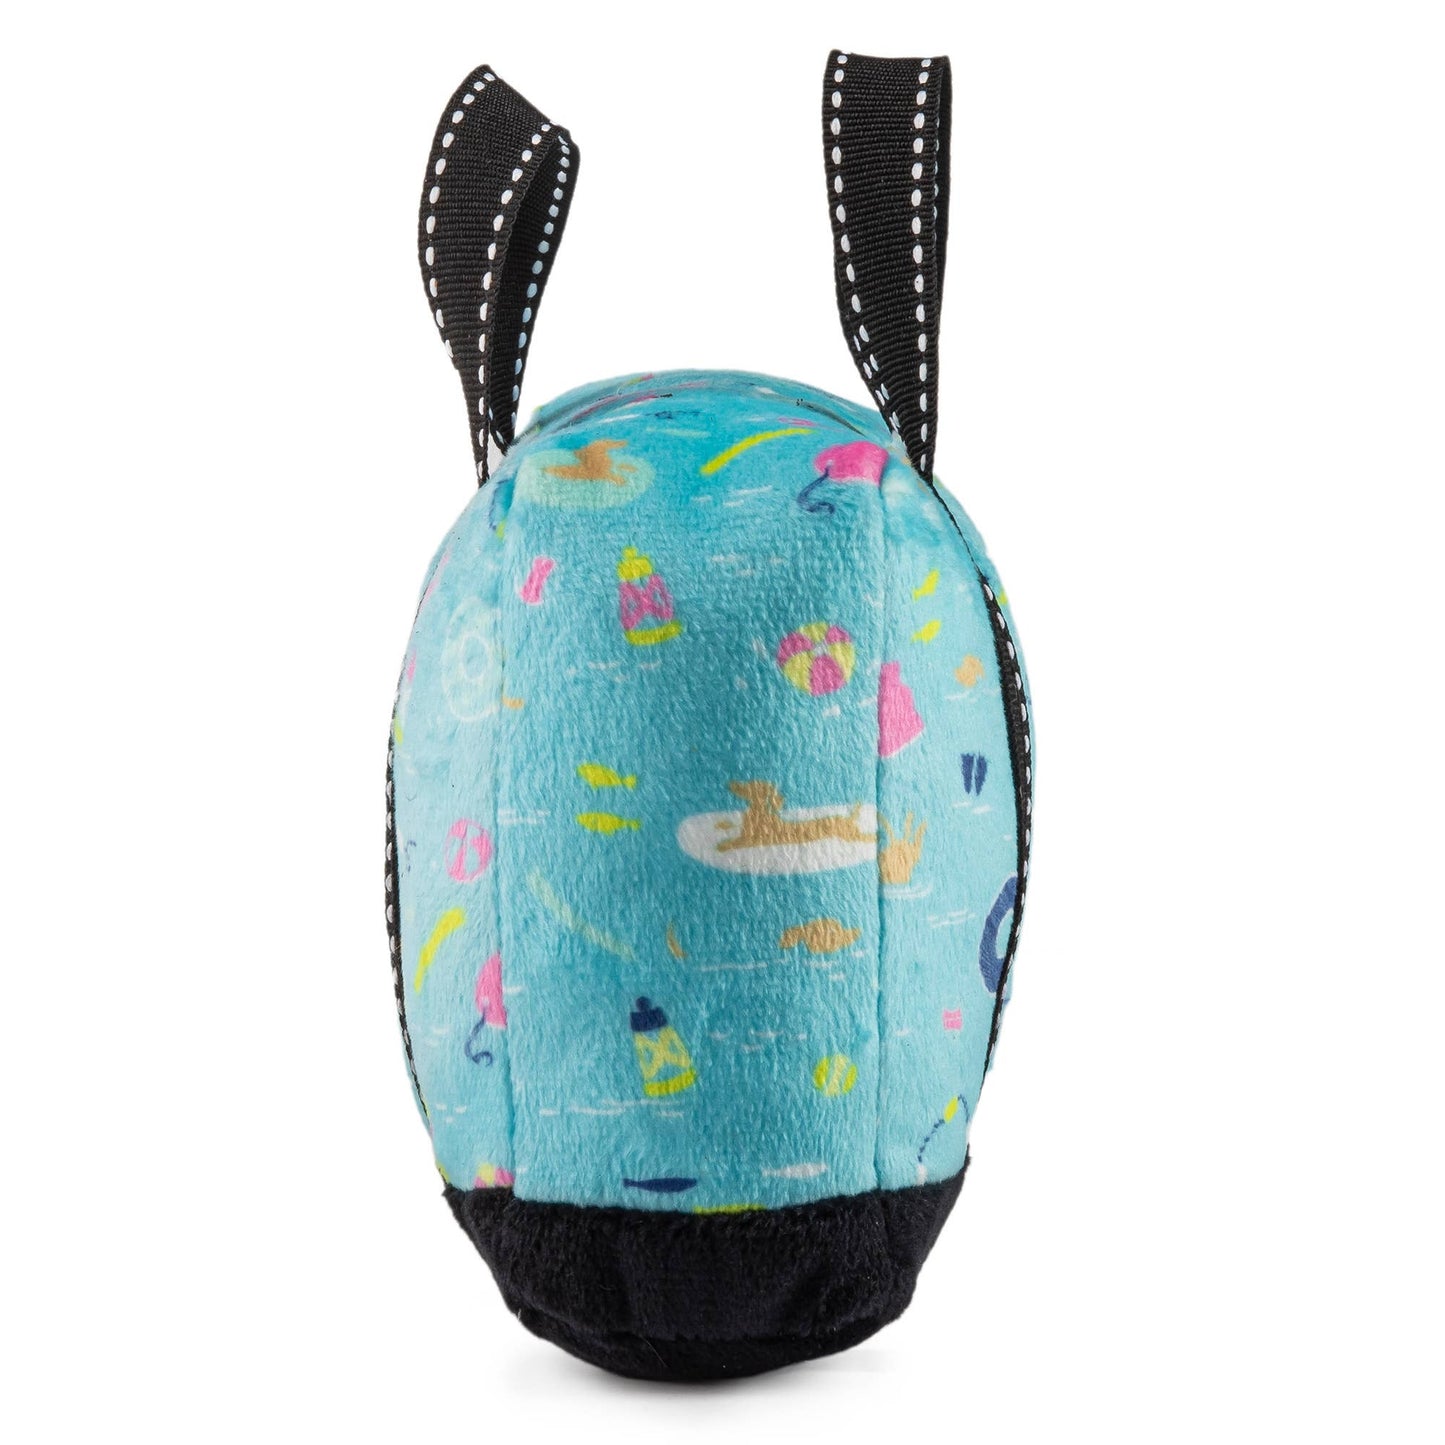 Haute Diggity Dog Scout Deano Hand Bag Toy